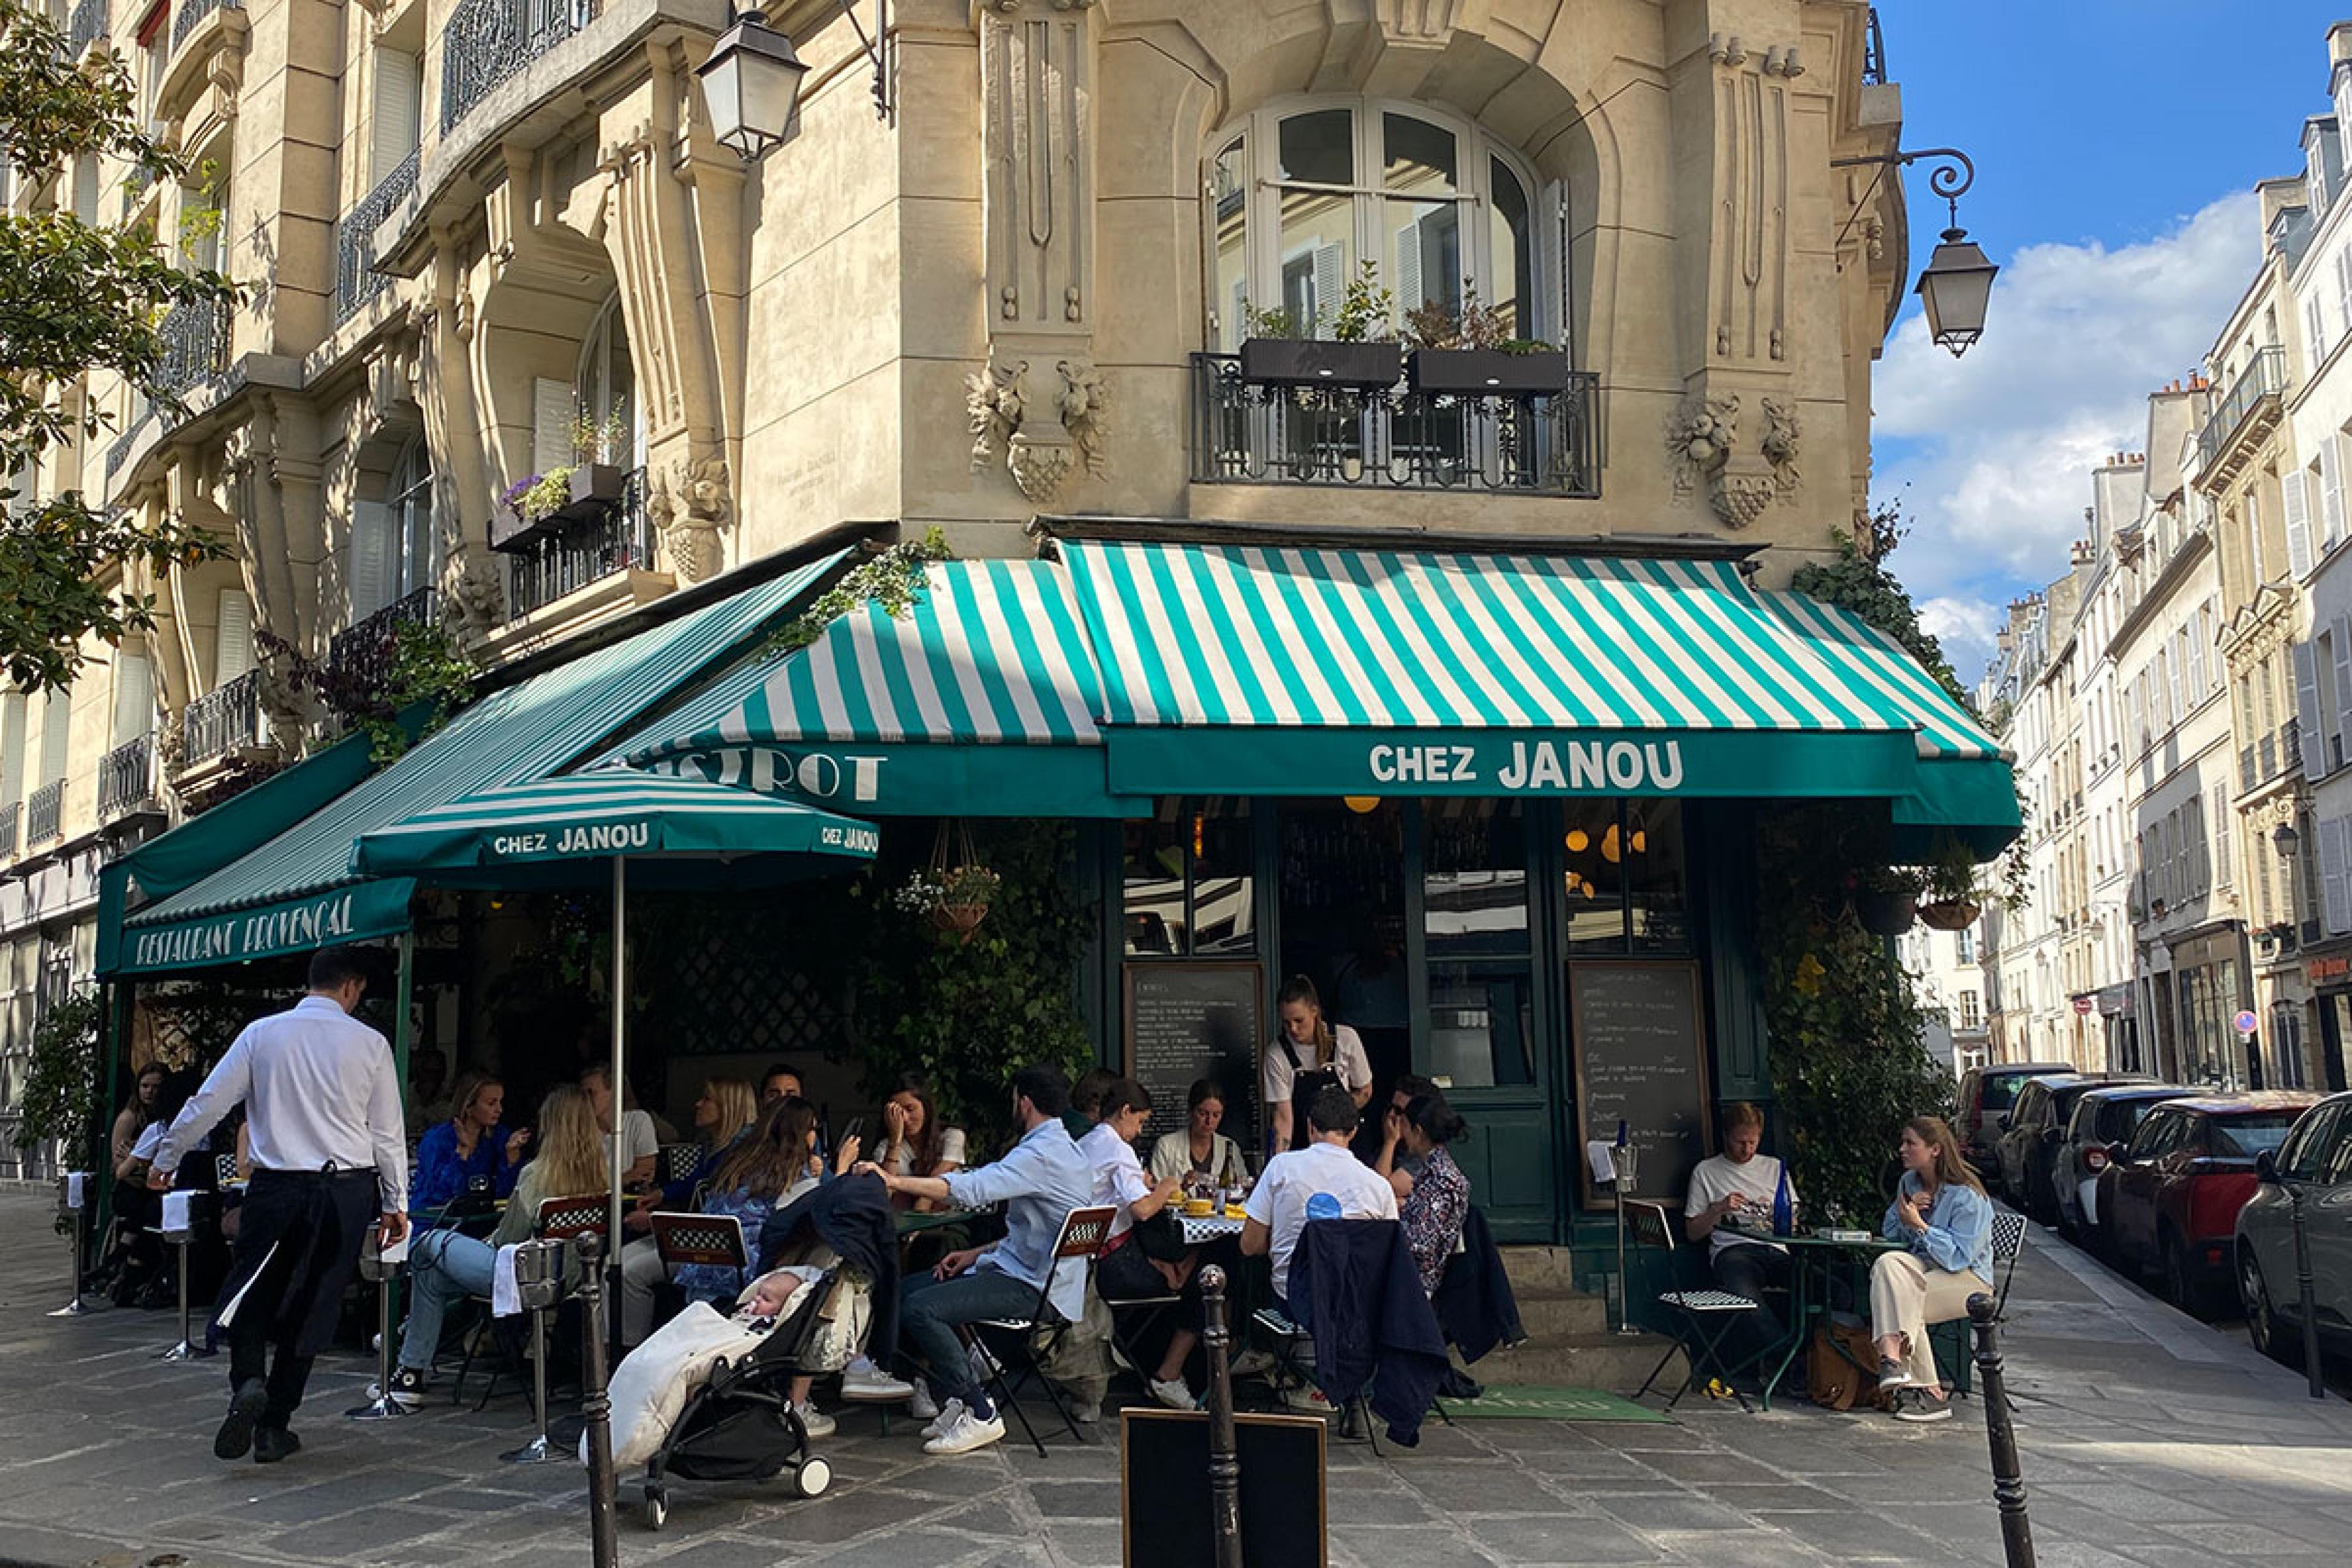 street cafe in paris on a corner with green awning reading chez janou